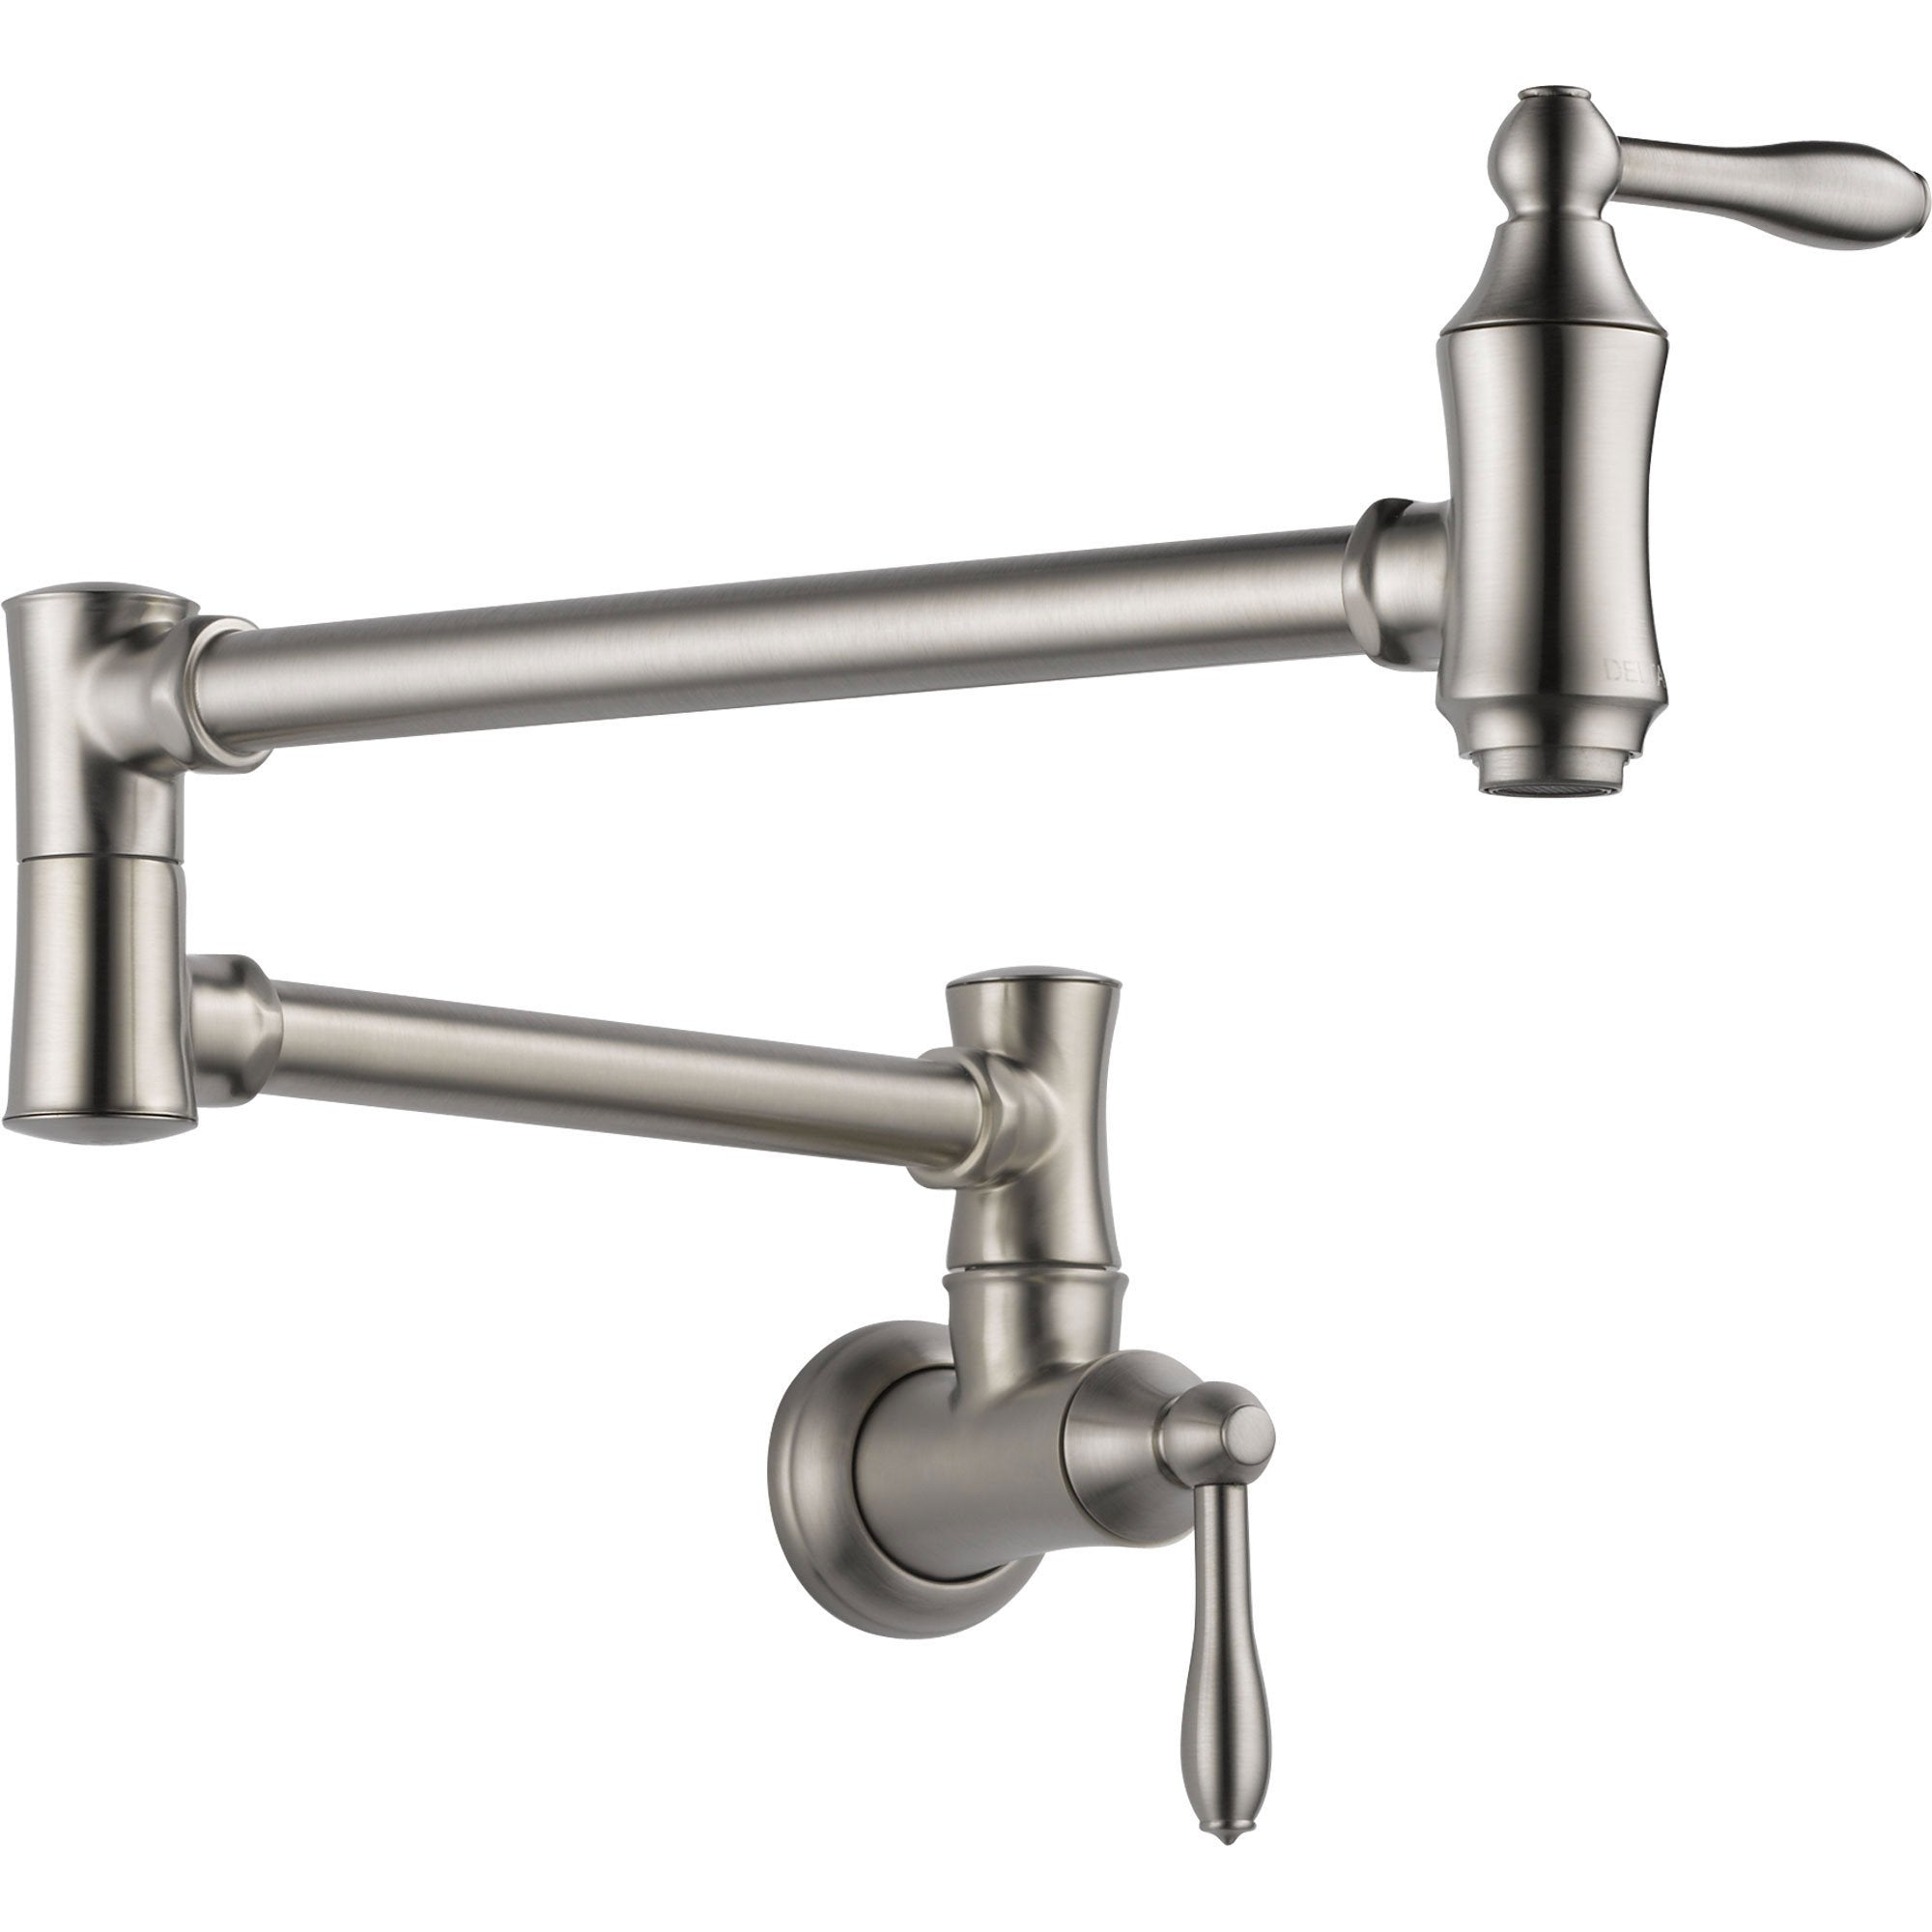 Delta Traditional Kitchen Wall Mounted Pot filler Faucet in Stainless 535204